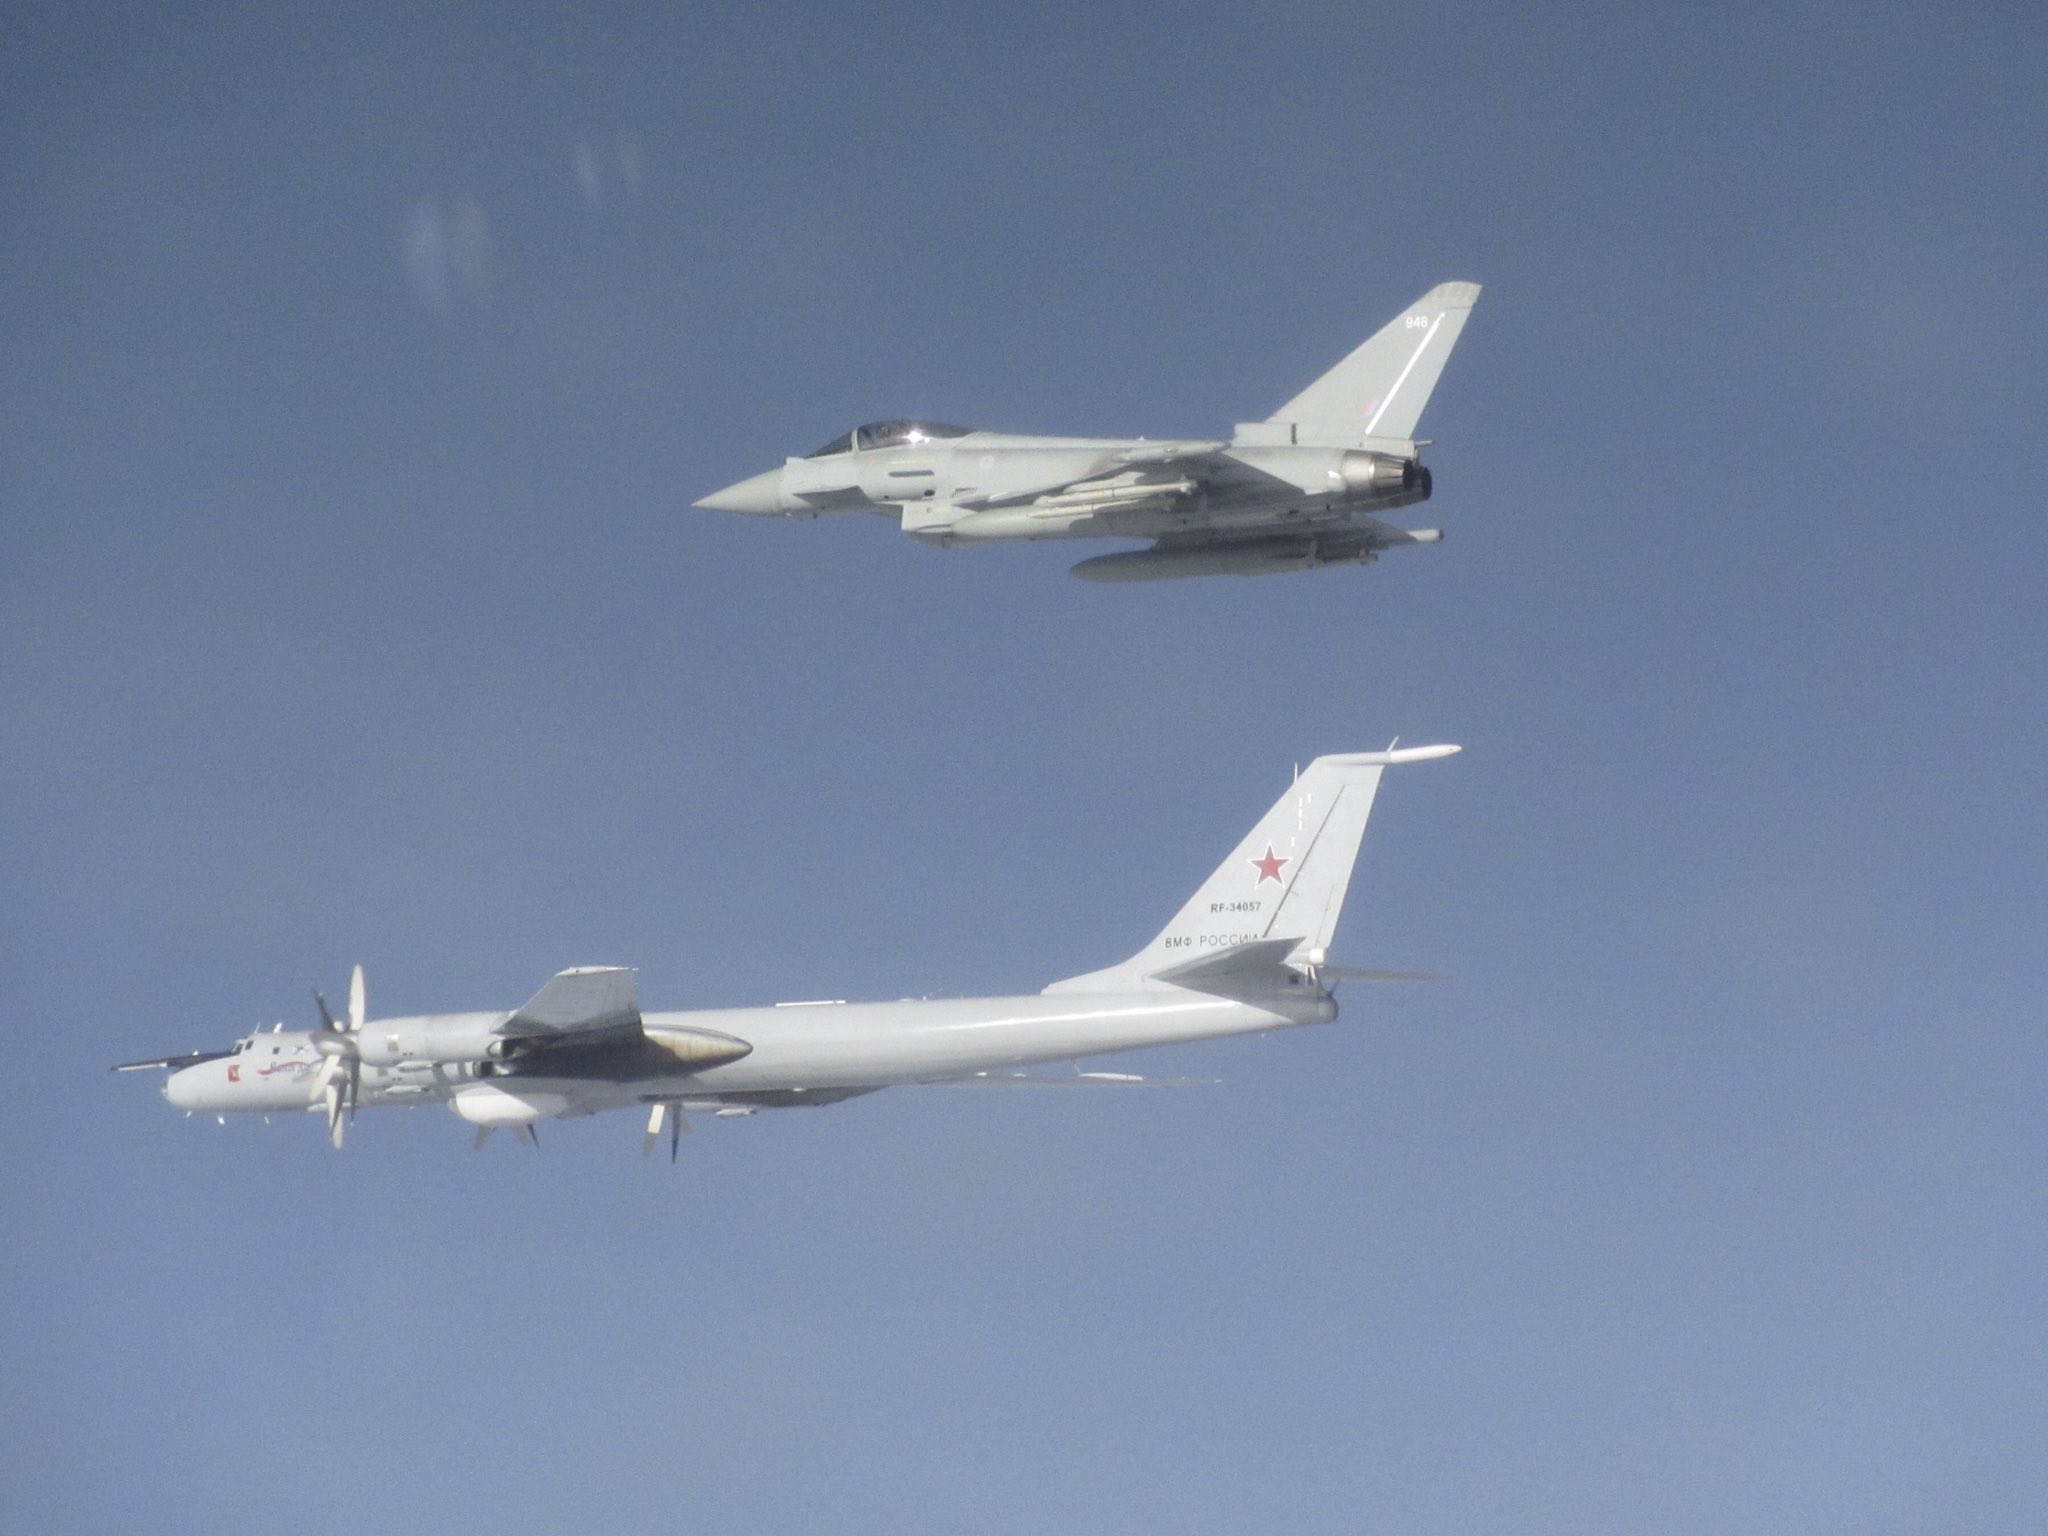 Royal Air Force Quick Reaction Alert Typhoon intercept Russian aircraft approaching UK Air Space on the 7th March 2020.